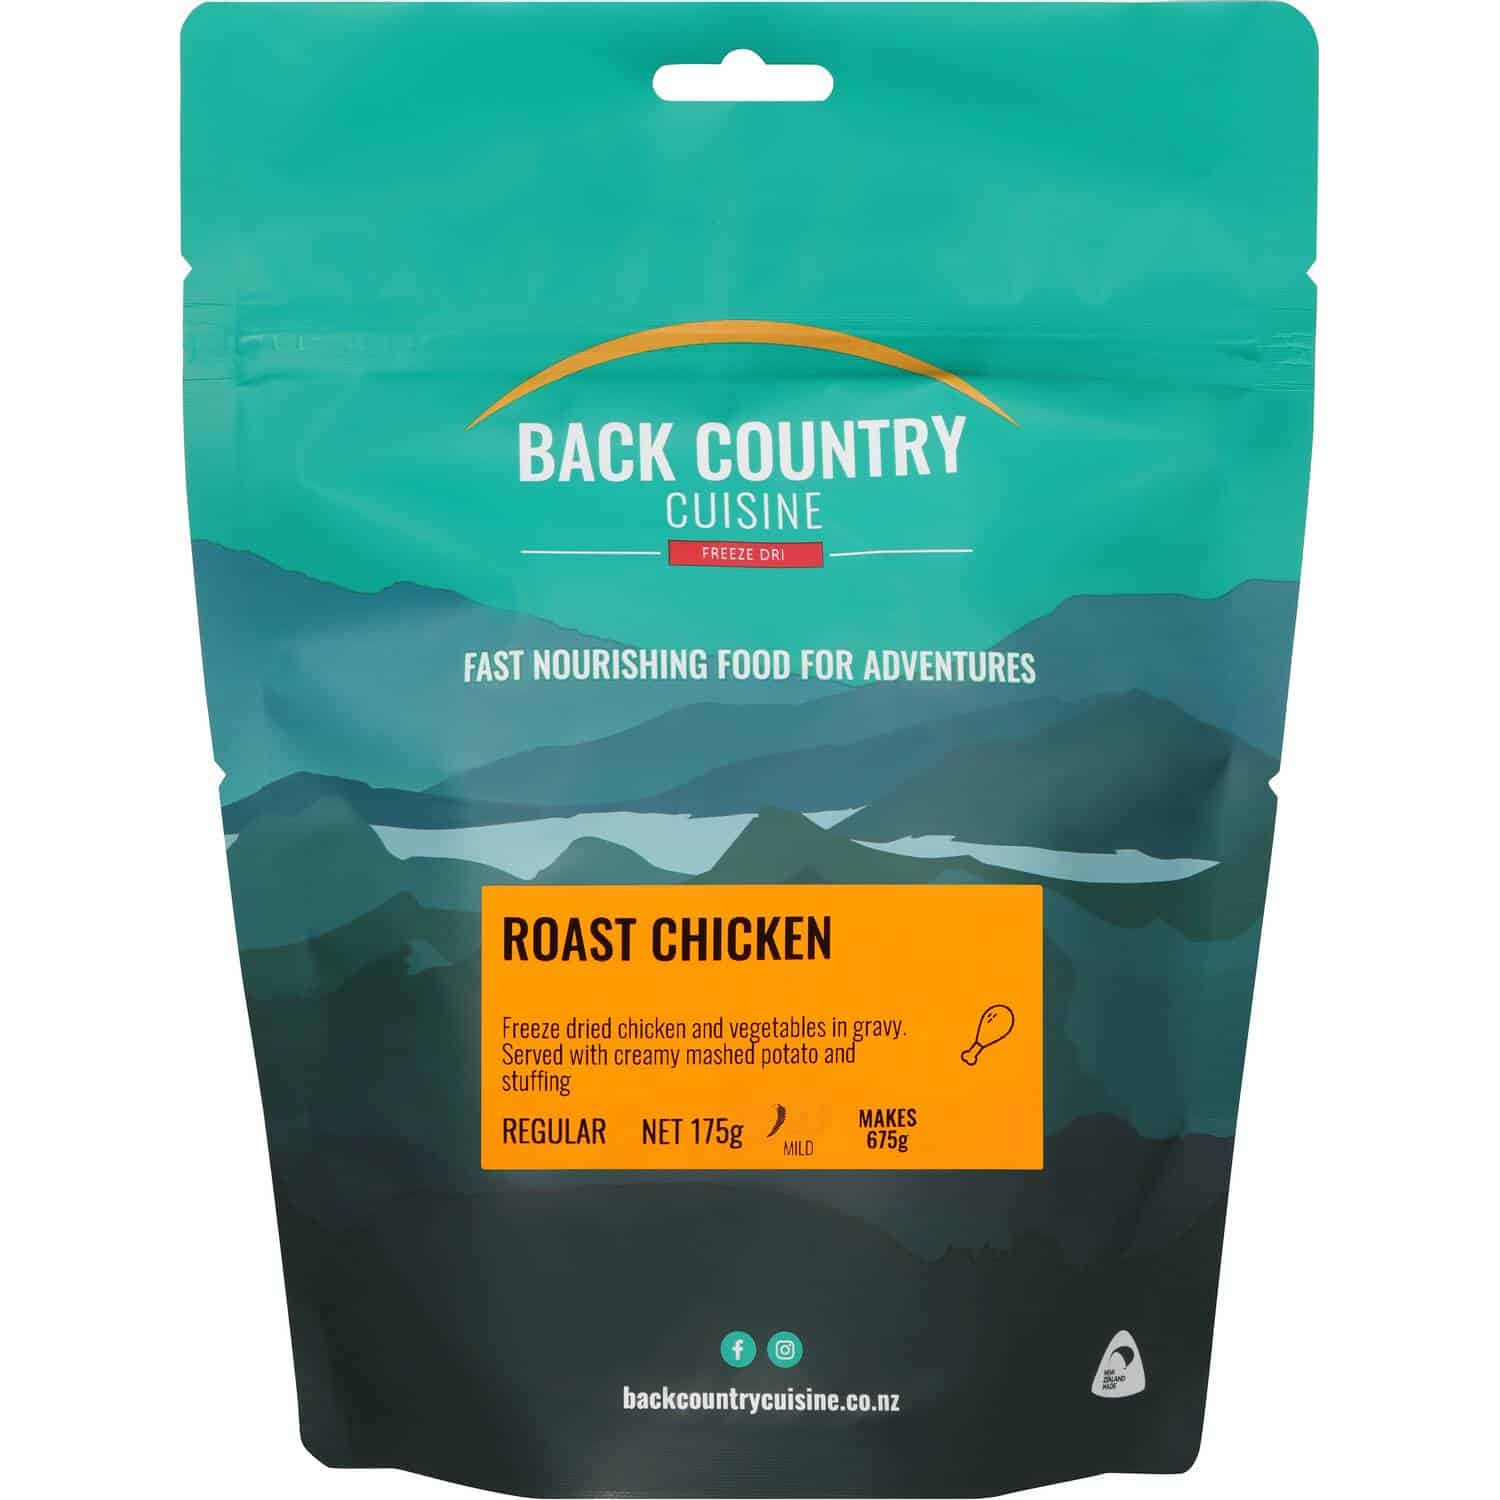 Back Country Cuisine Roast Chicken Regular - Tramping Food and Accessories sold by Venture Outdoors NZ